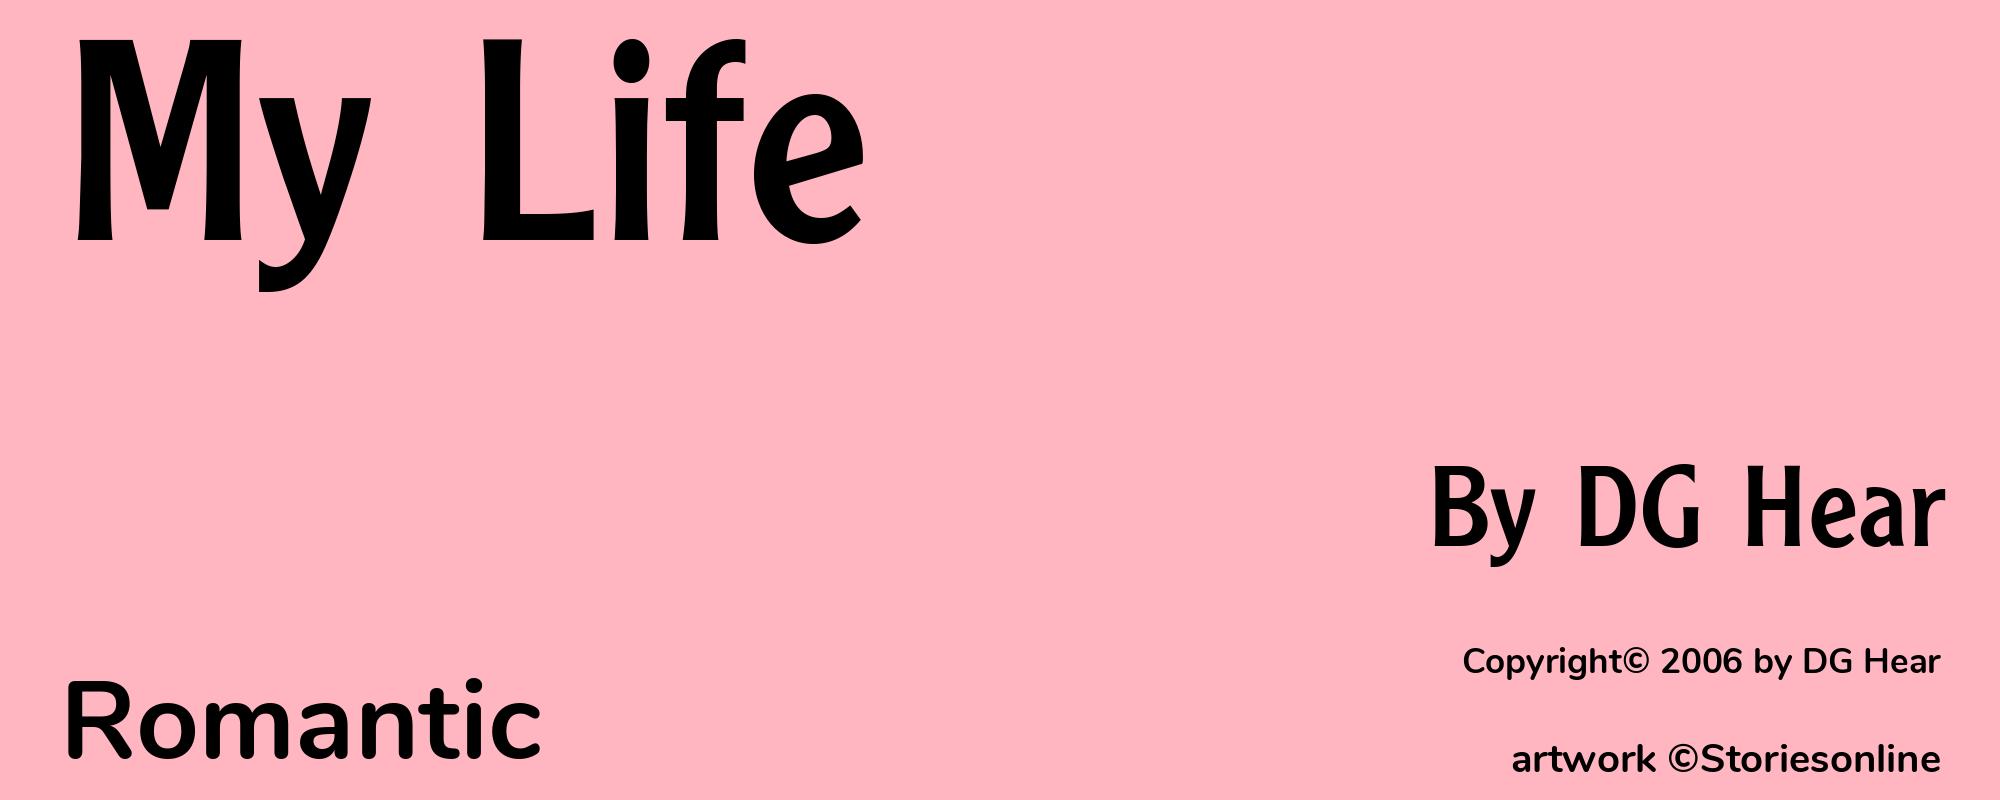 My Life - Cover